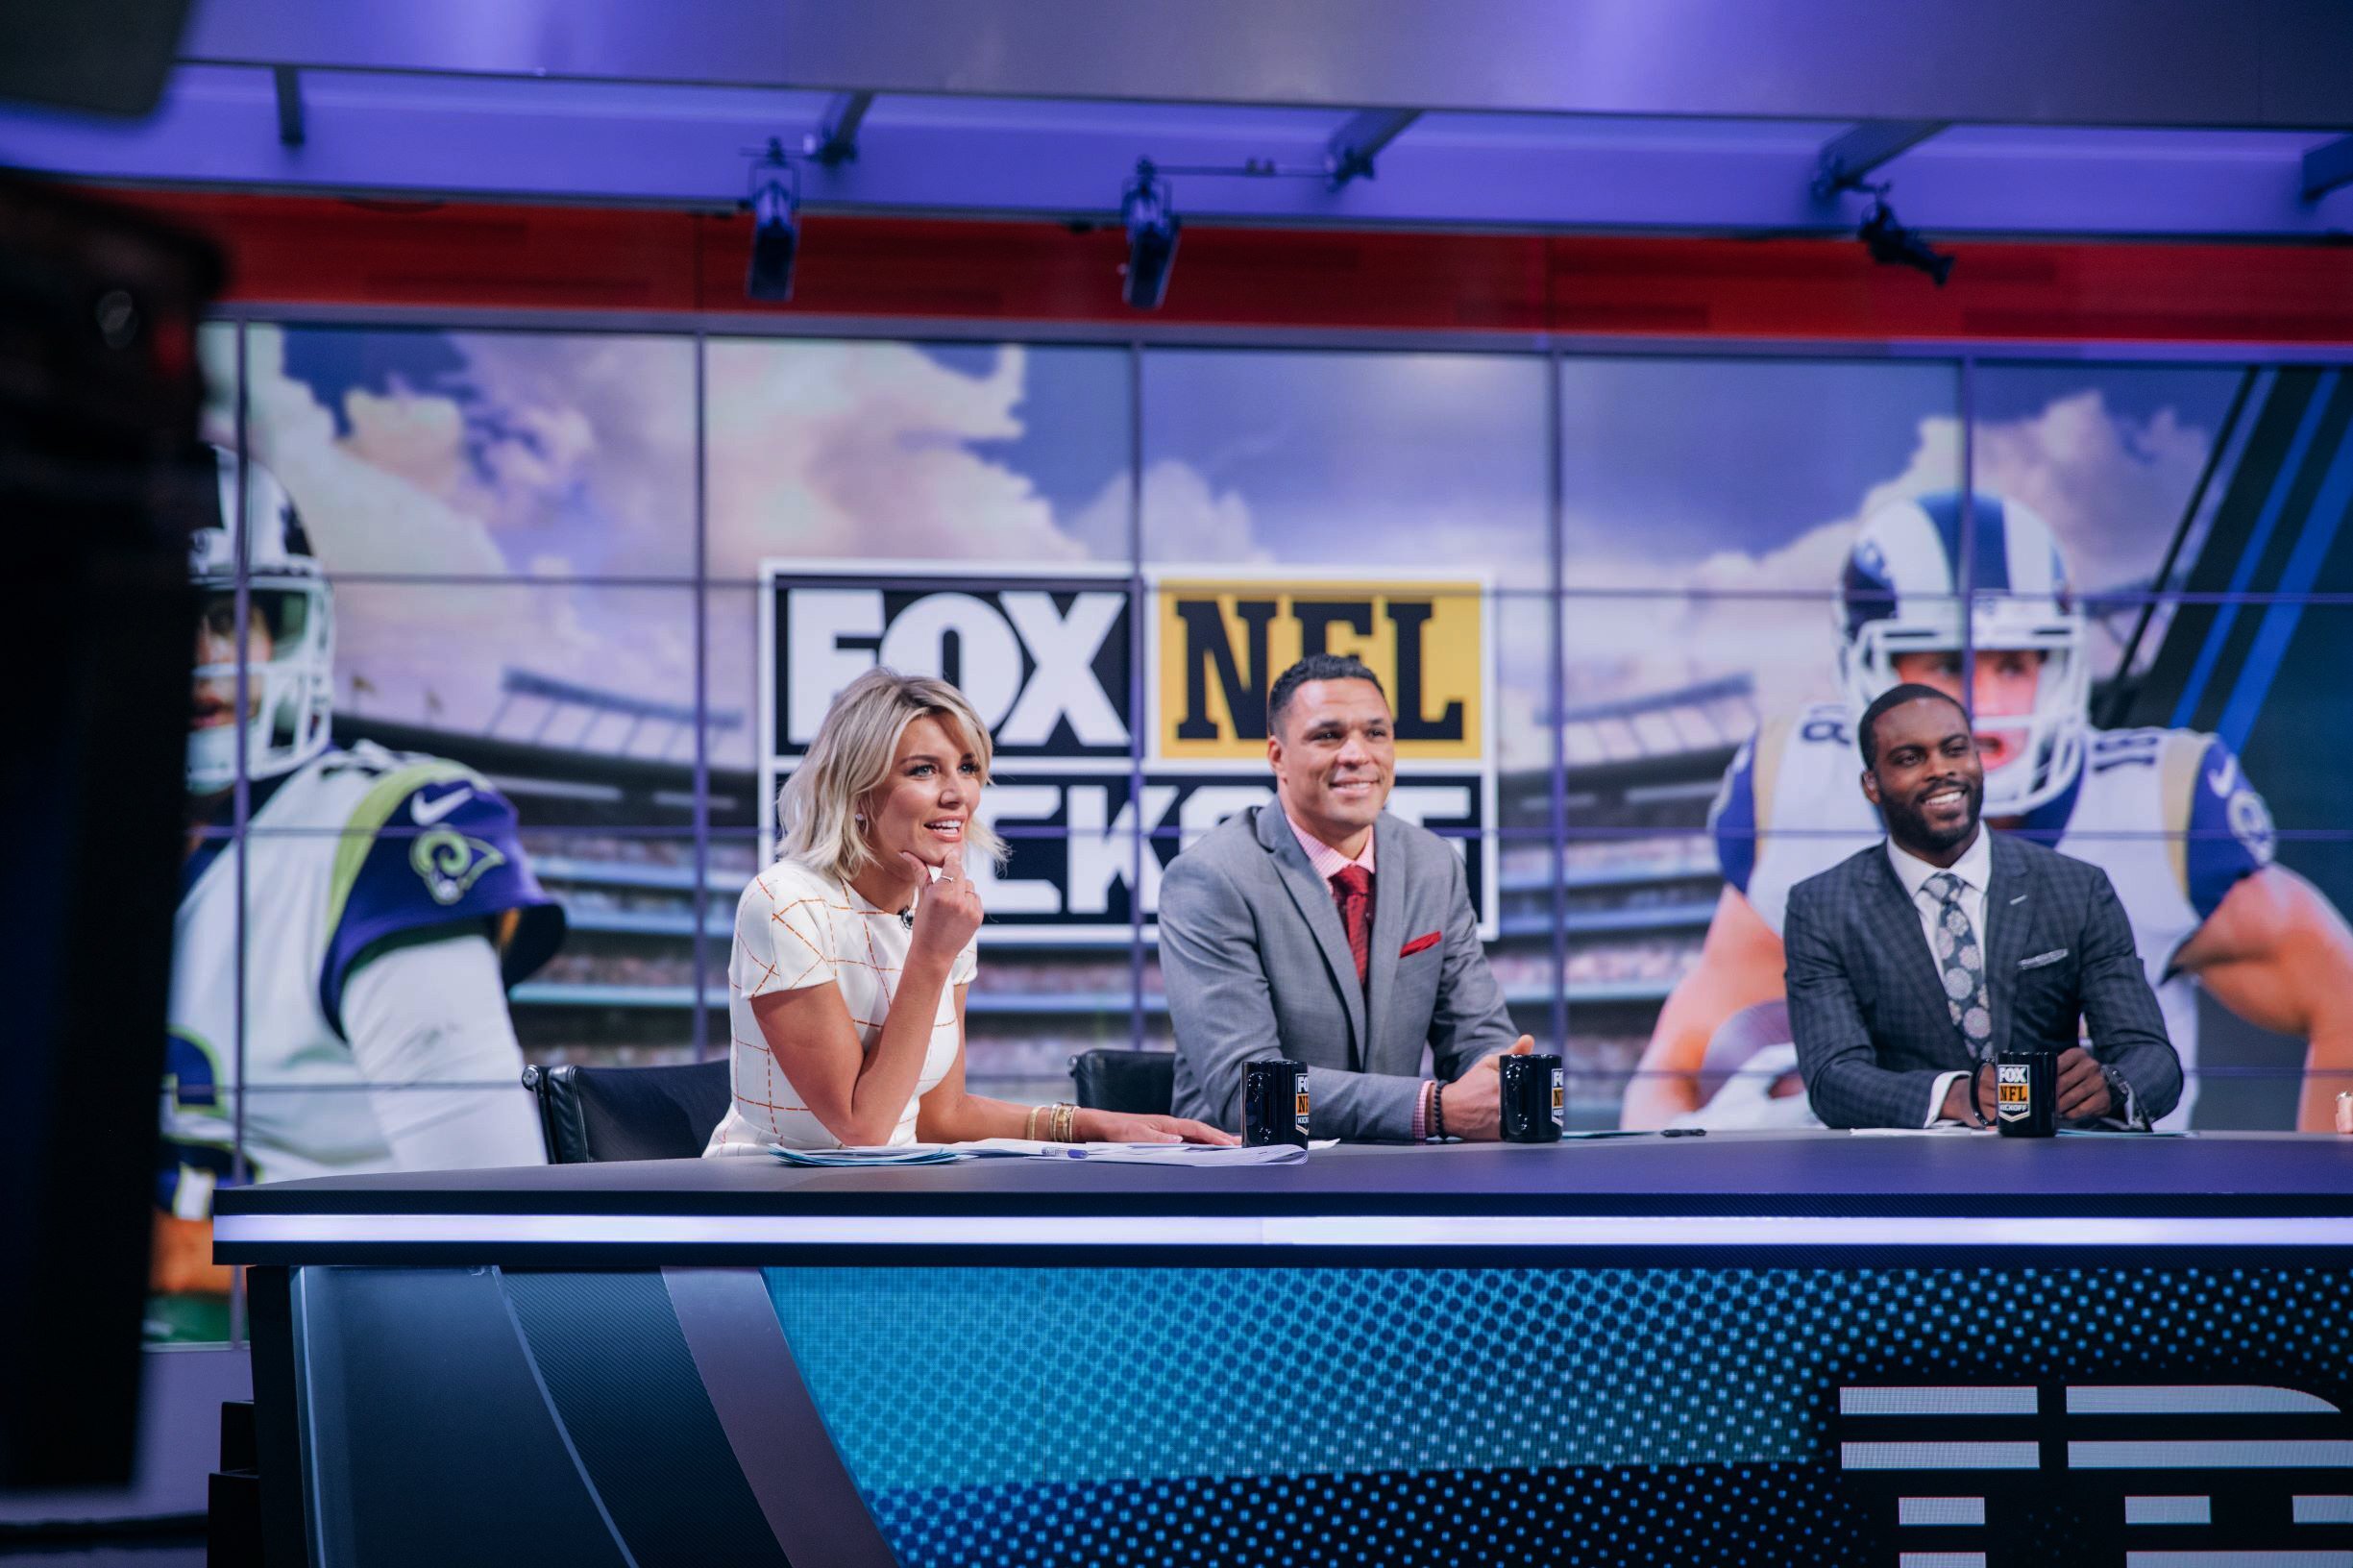 'Fox NFL Kickoff' weathers challenges faced by pregame shows AP News